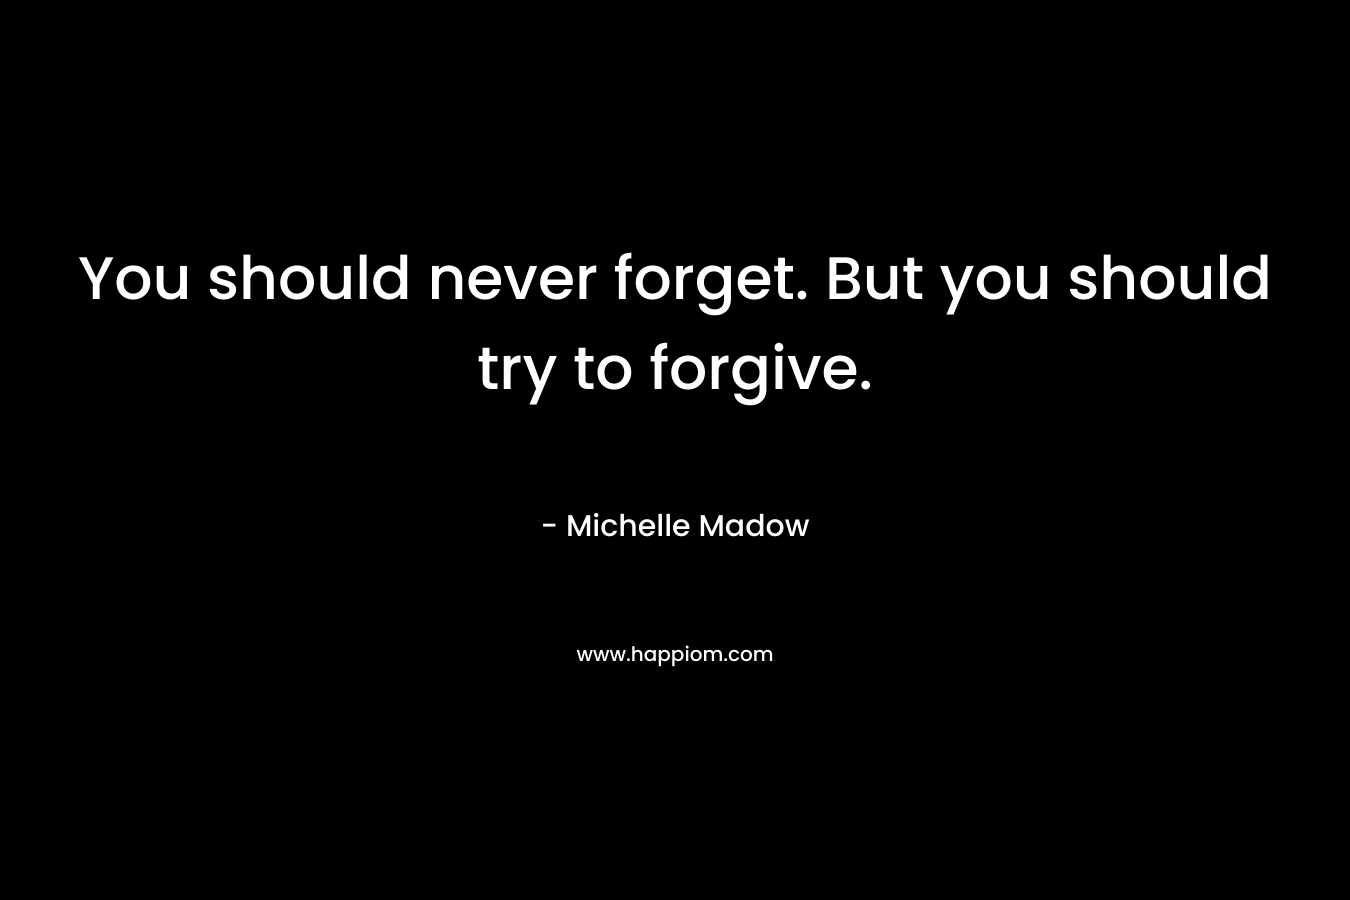 You should never forget. But you should try to forgive.